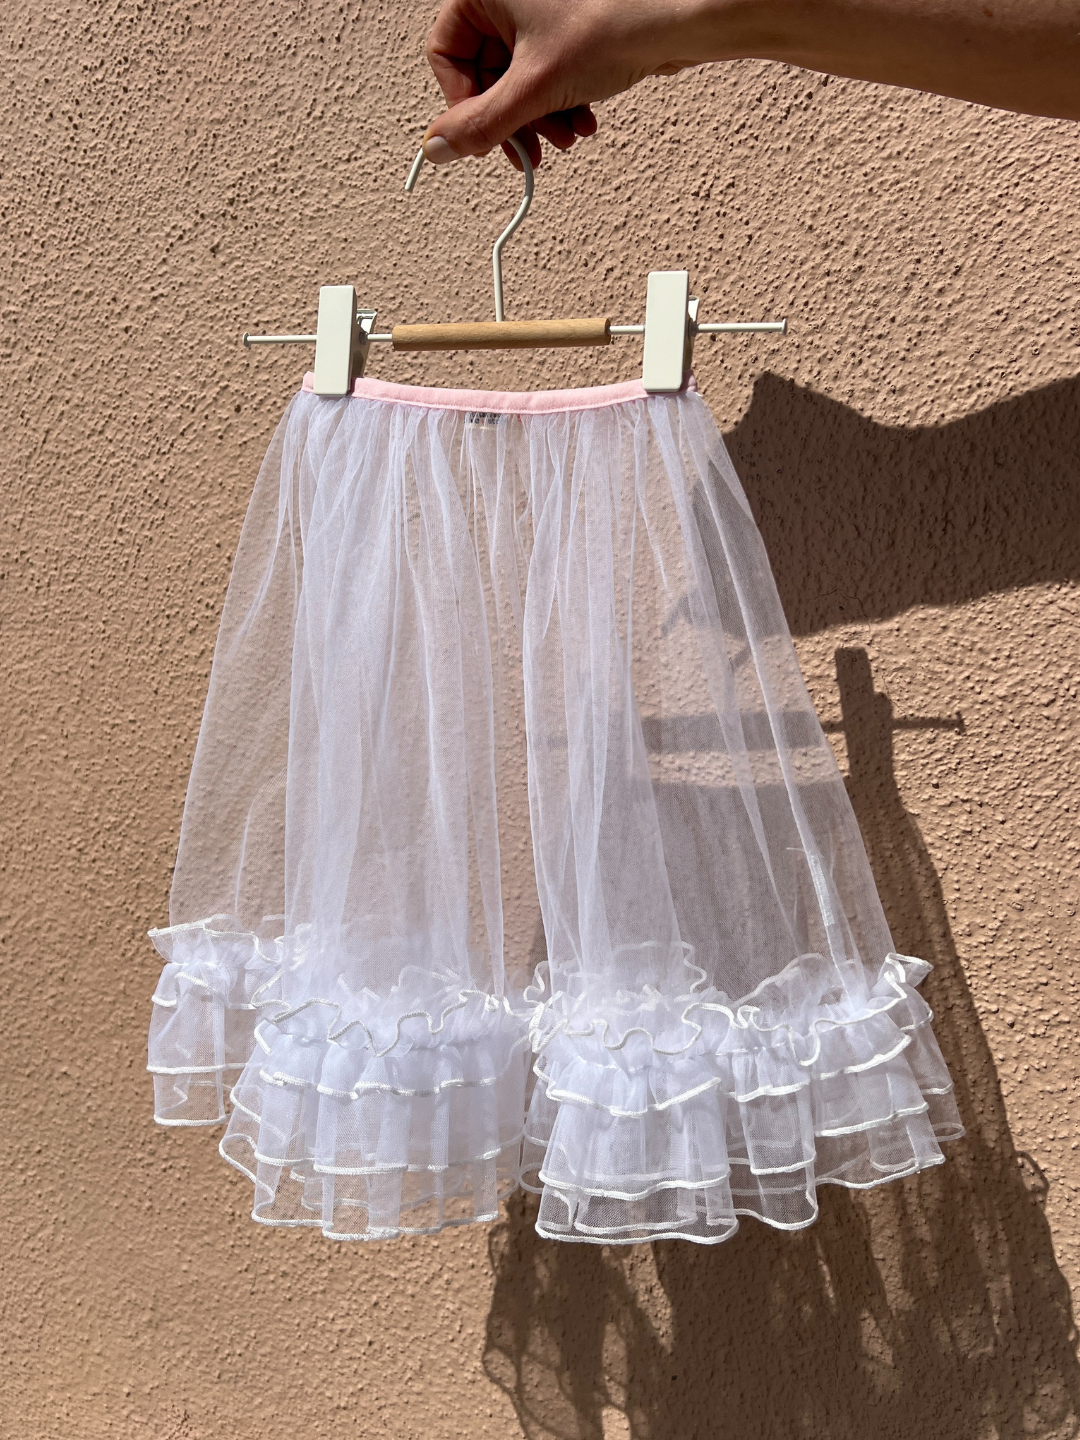 The kid's tulle layer skirt, white with a pink waistband, hanging on a white clip hanger, held by a hand against a peach colored textured wall, leaving a shadow.